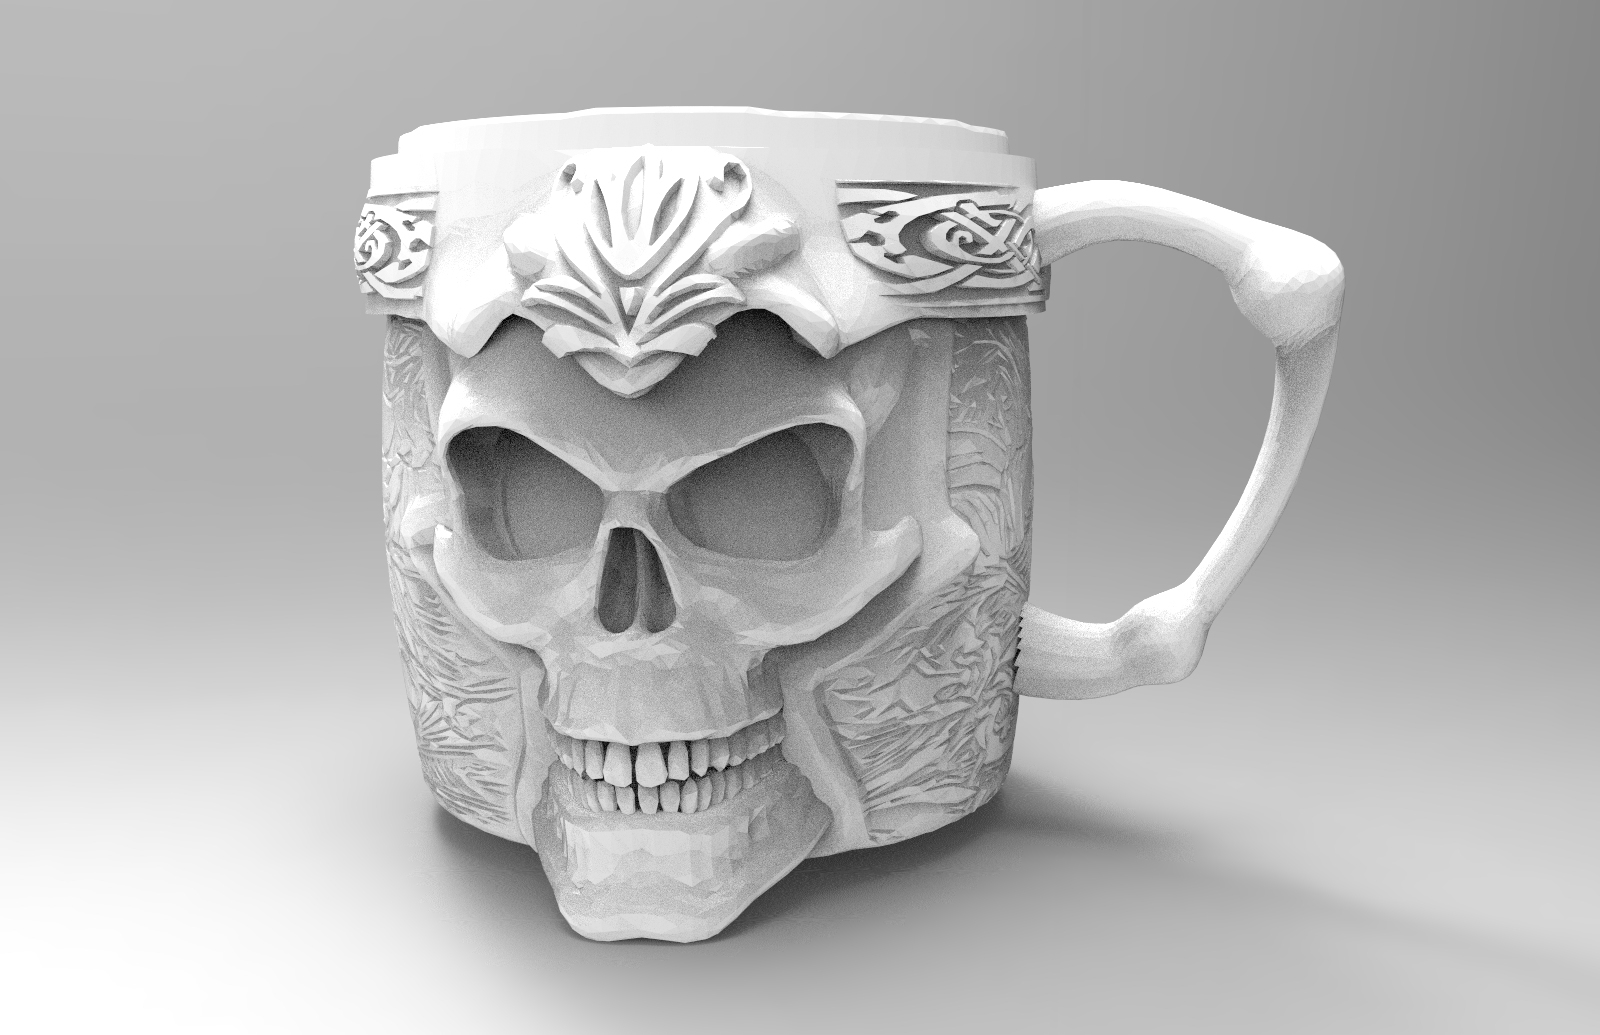 3D Printed Mugs & Cups: The Best Models to 3D Print